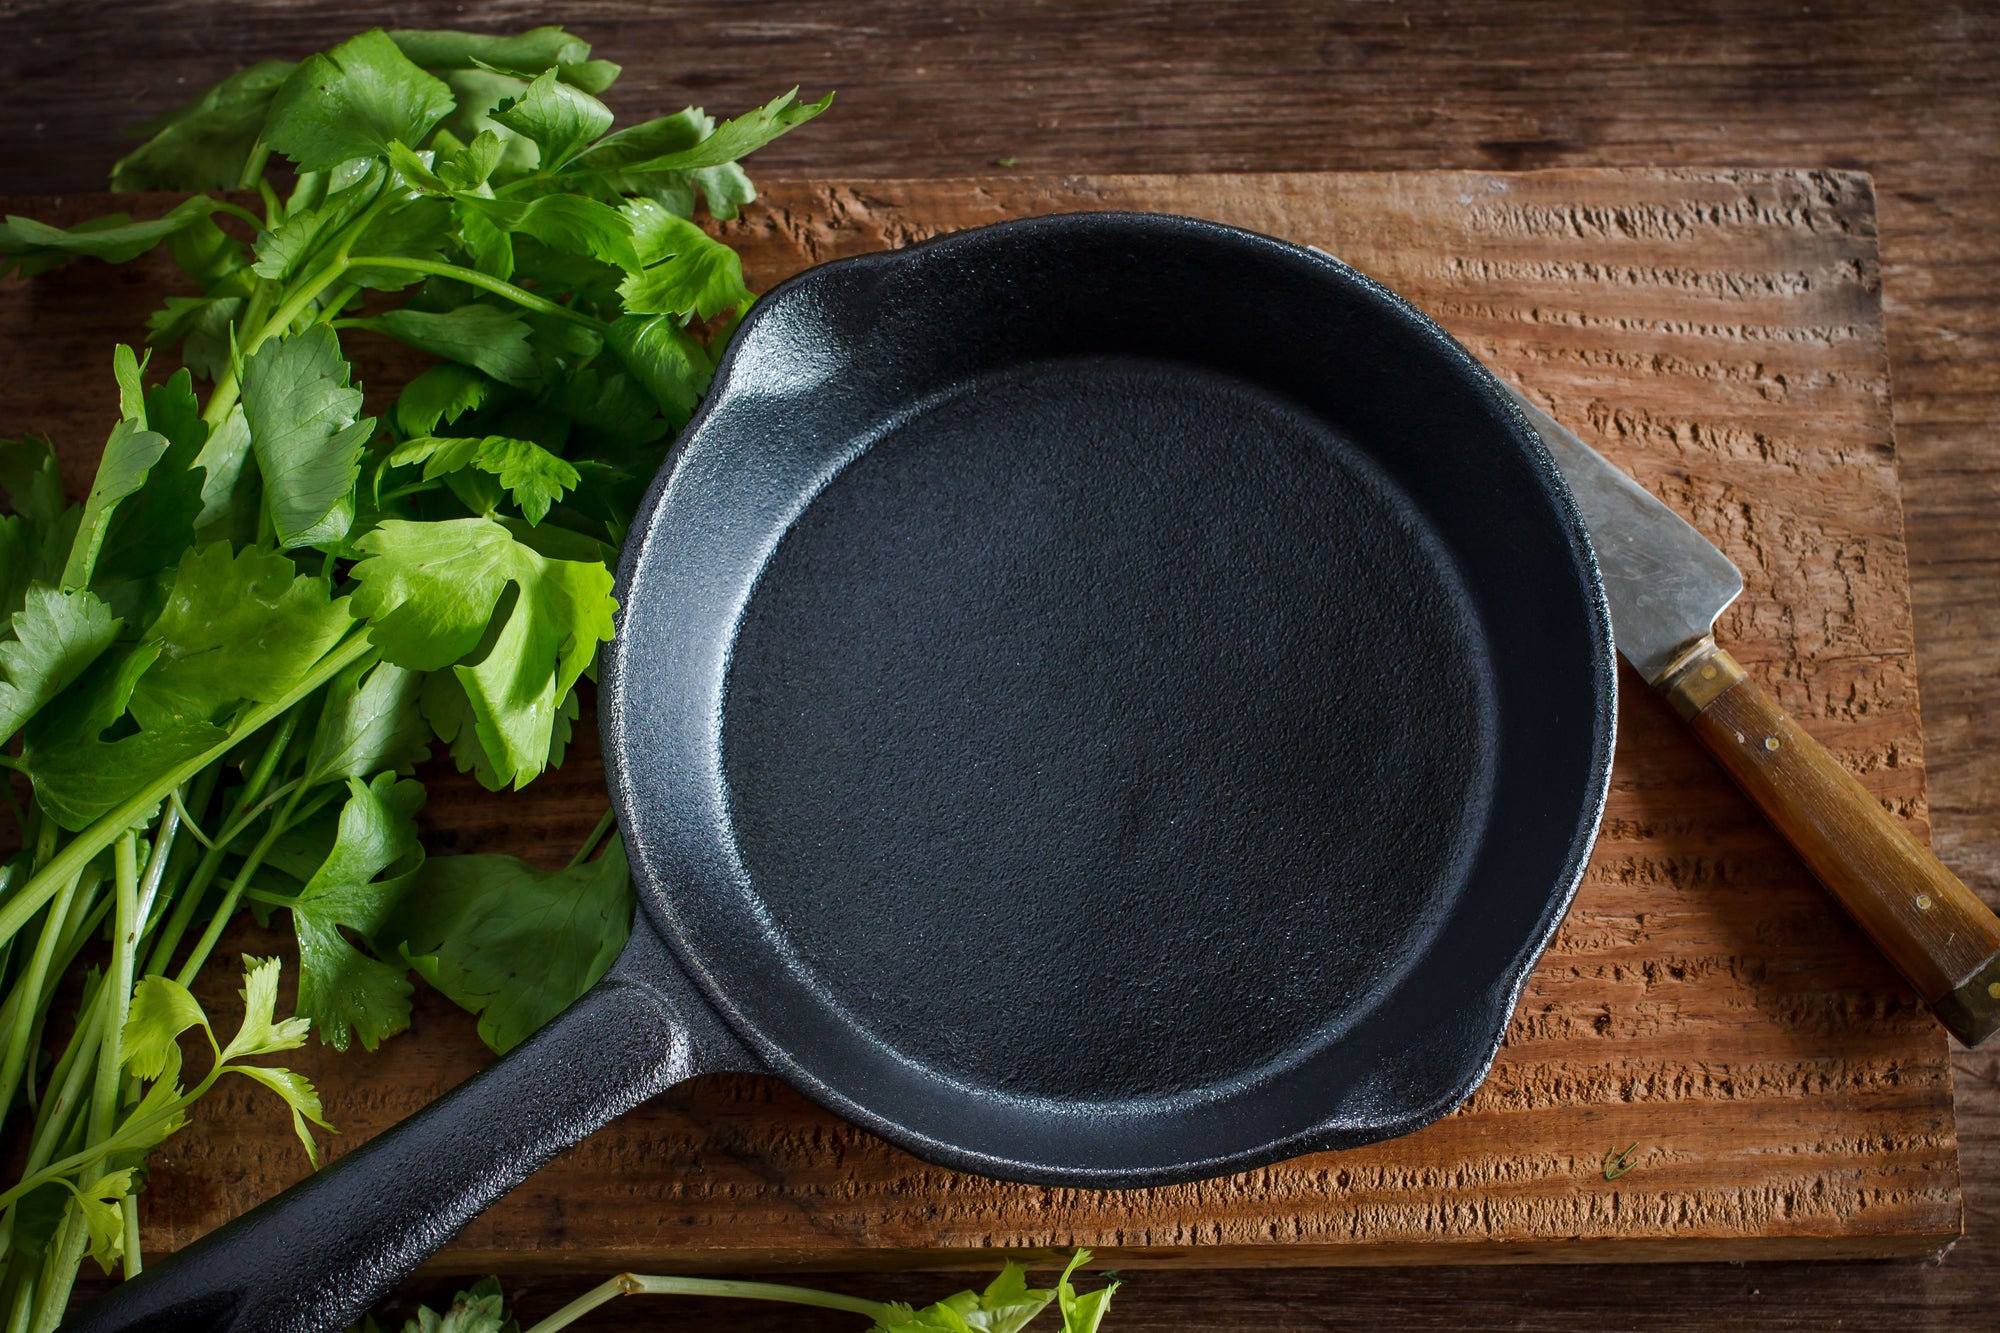 How to Clean Cast Iron Cookware - A Step by Step Guide